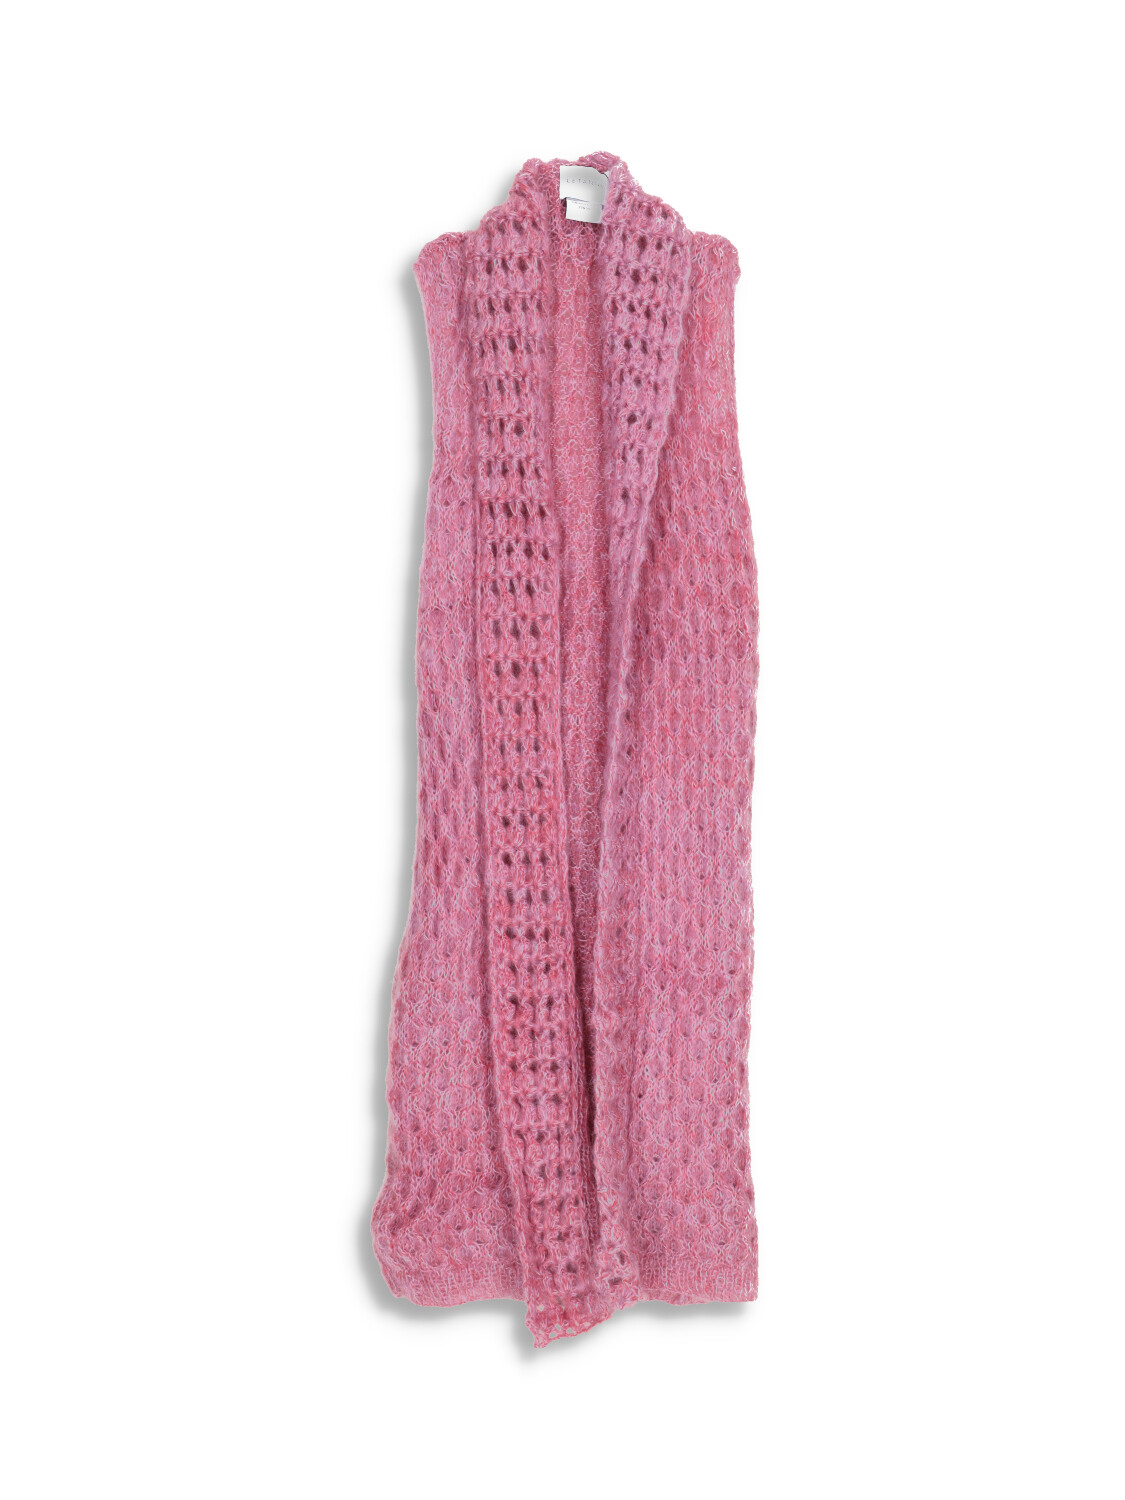 Gia - knitted vest in silk-mohair blend